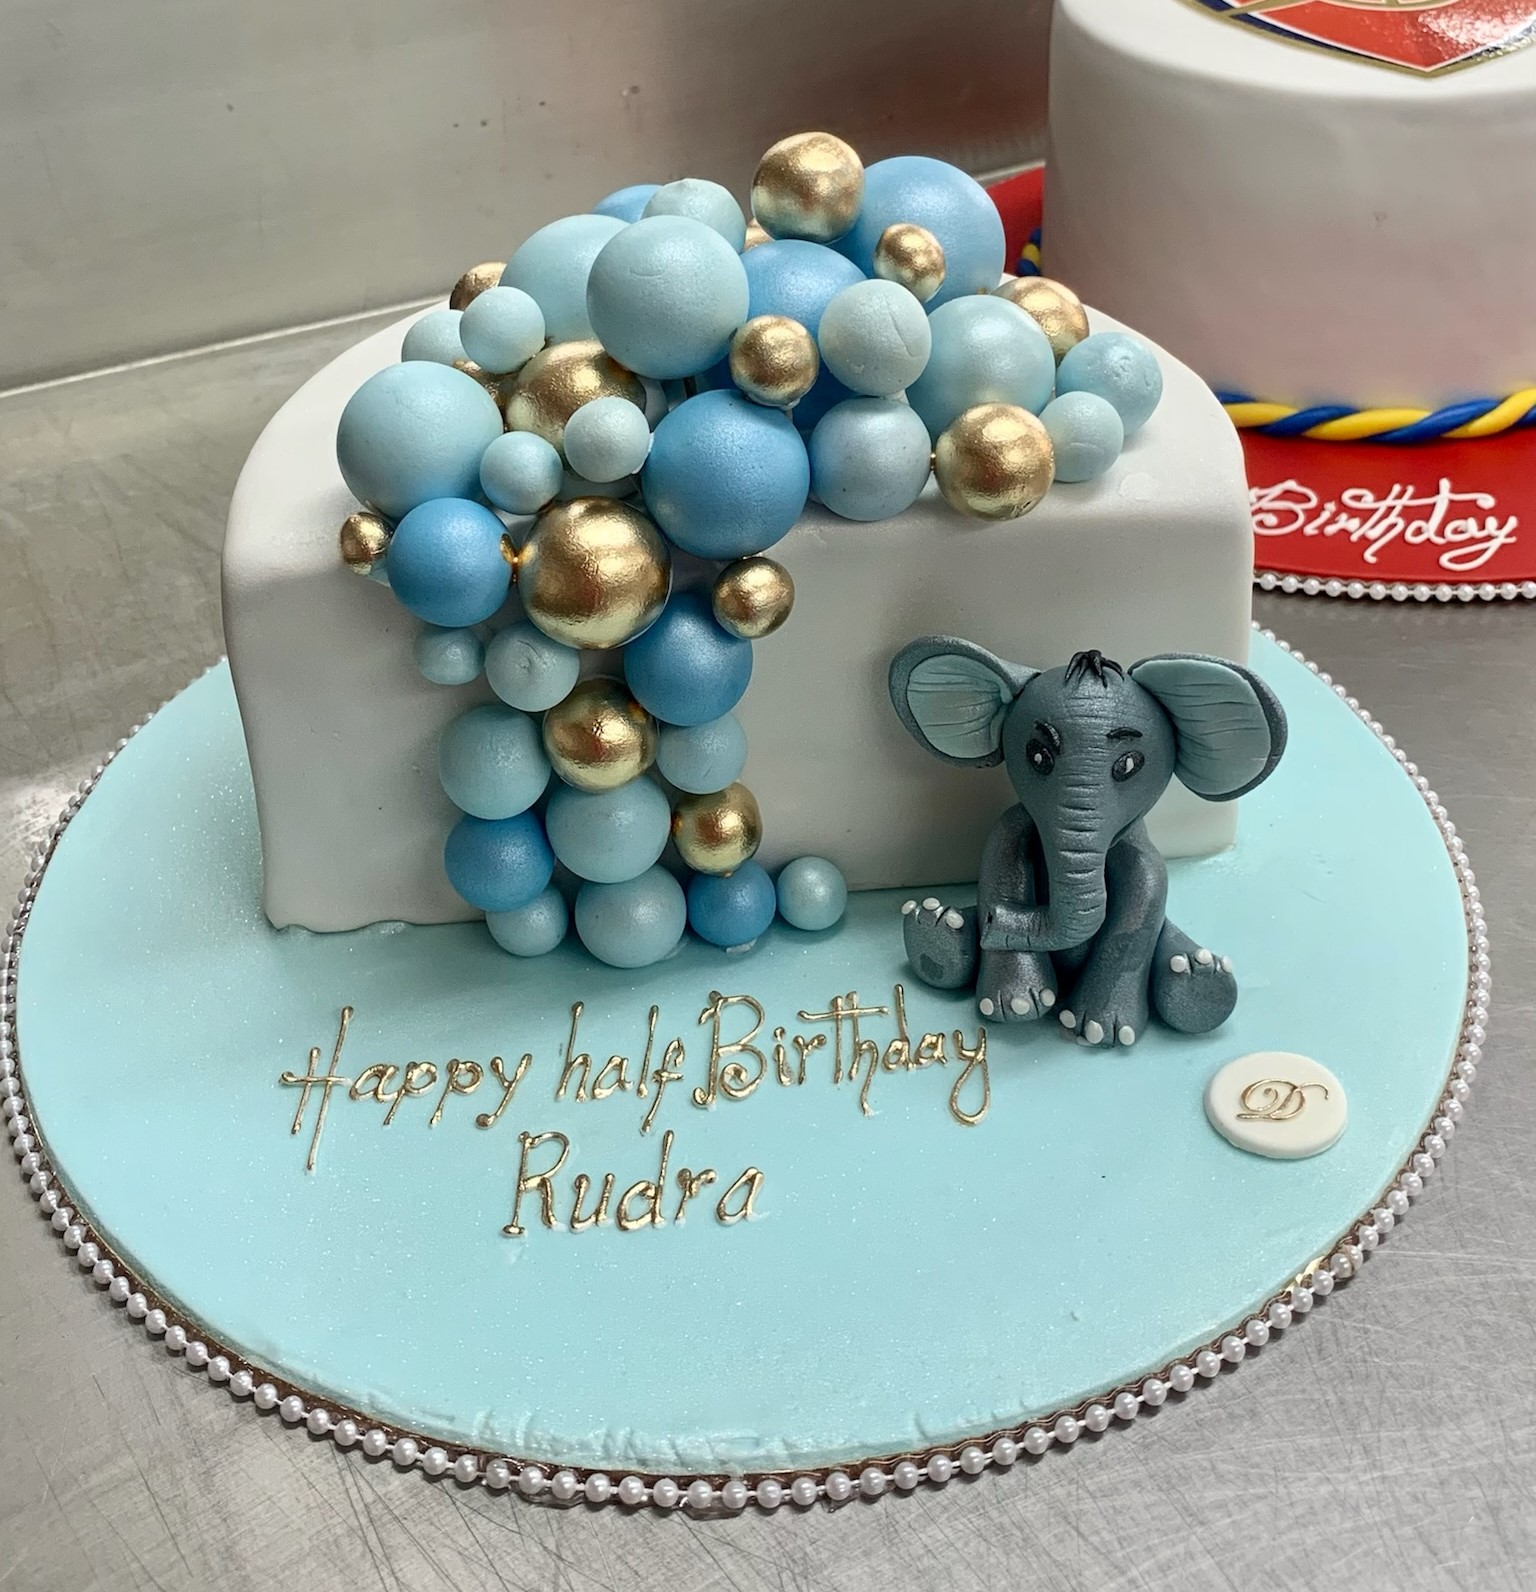 Free Fire Theme Cake|Birthday Cake delivery Hyderabad|CakeSmash.in